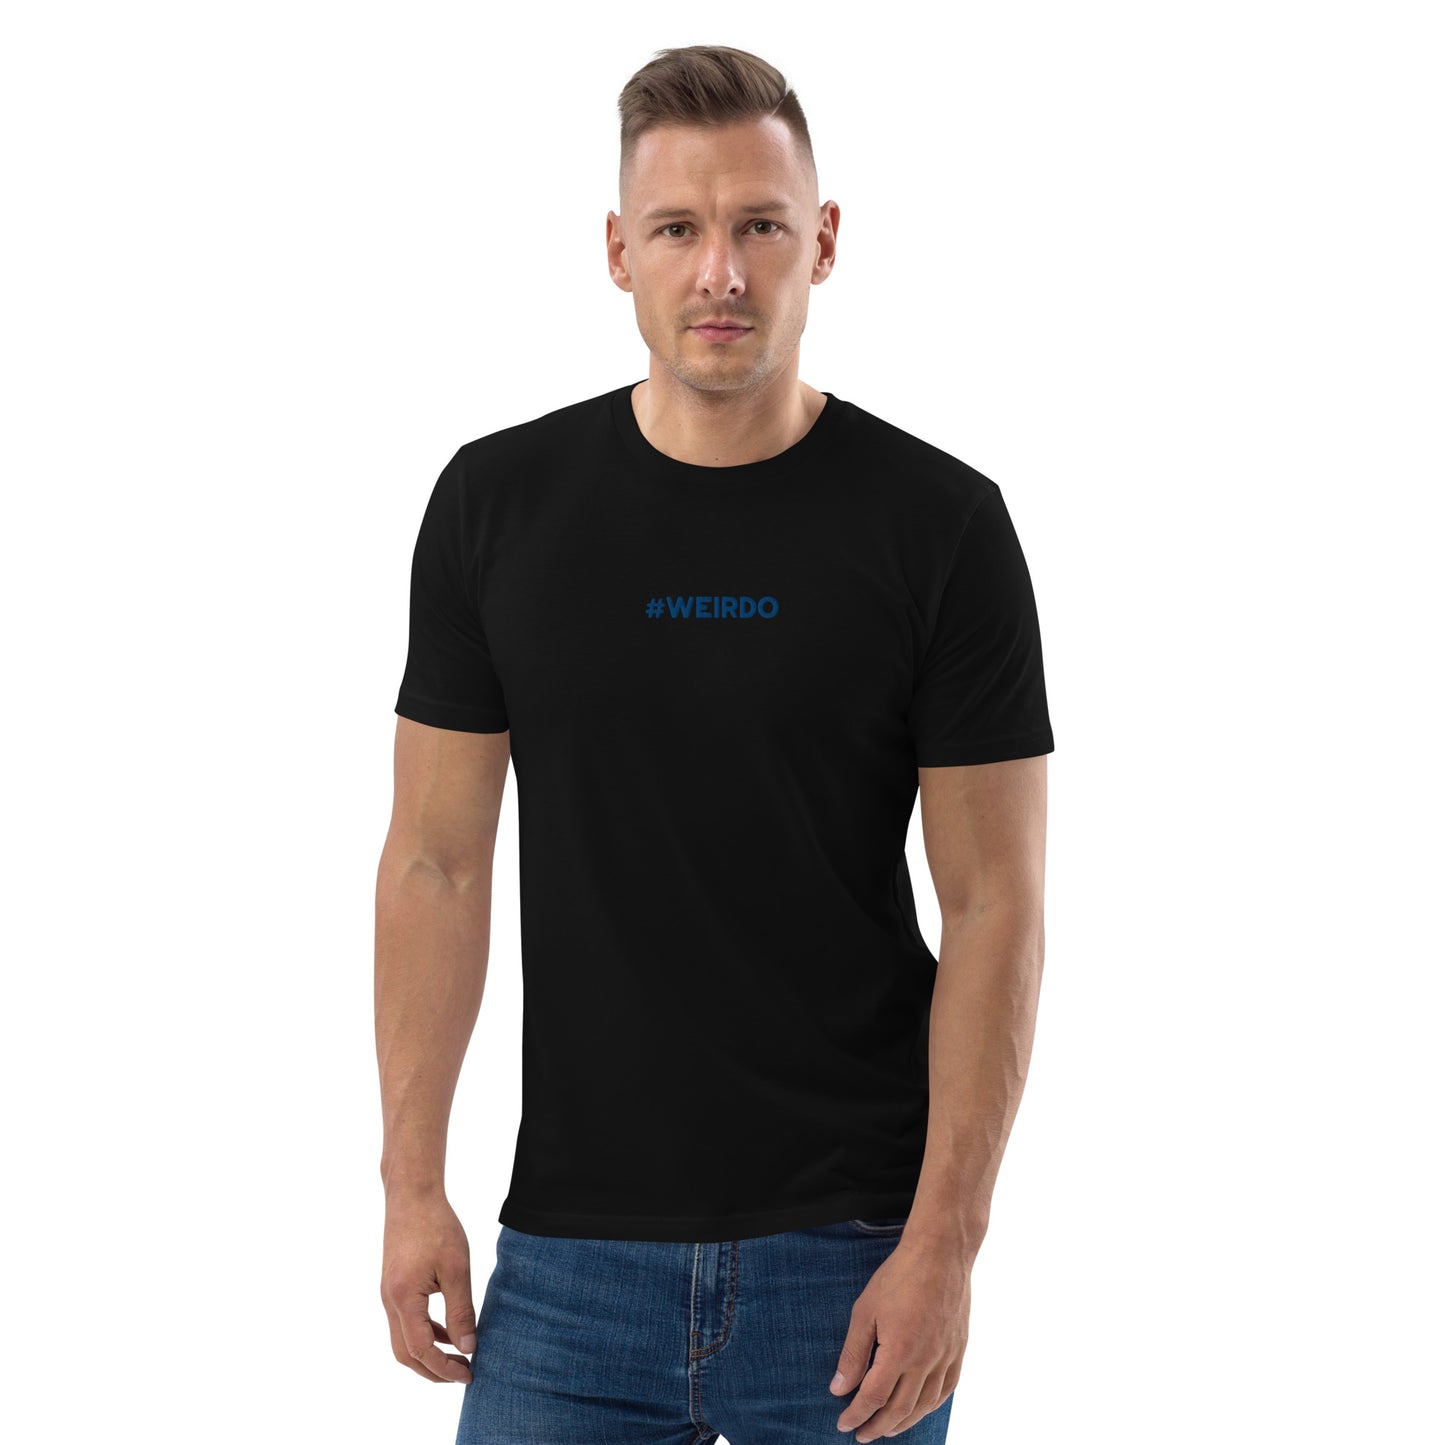 #WEIRDO | The number one funny t shirt company has all kinda weird t shirts for men! This black t shirt has the #WEIRDO meme embroidered at the front of the shirt.